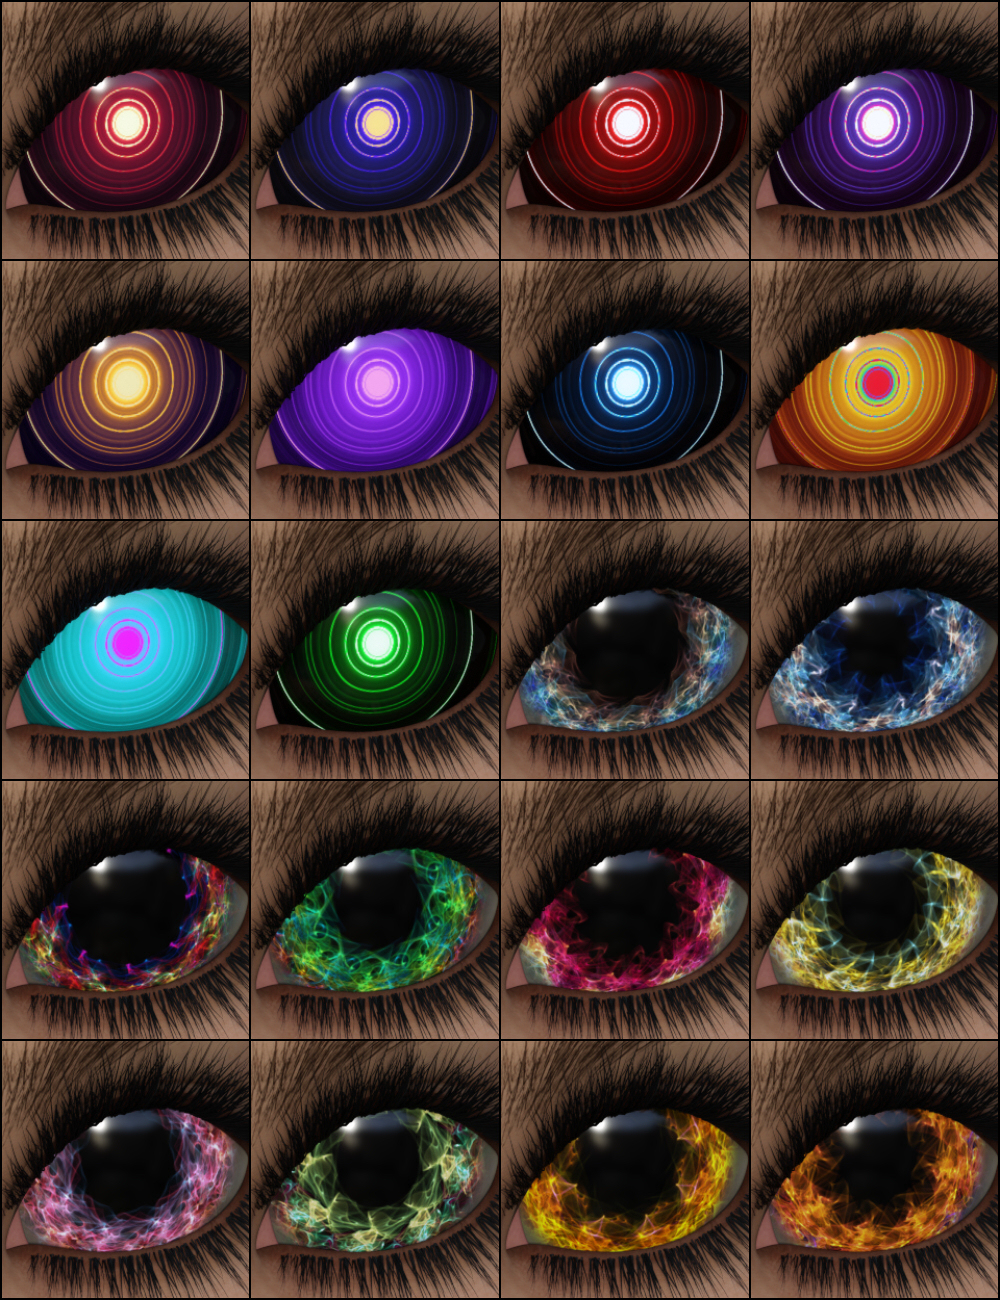 MMX Fantasy Eyes 3 for Genesis 3 and 8 by: Mattymanx, 3D Models by Daz 3D